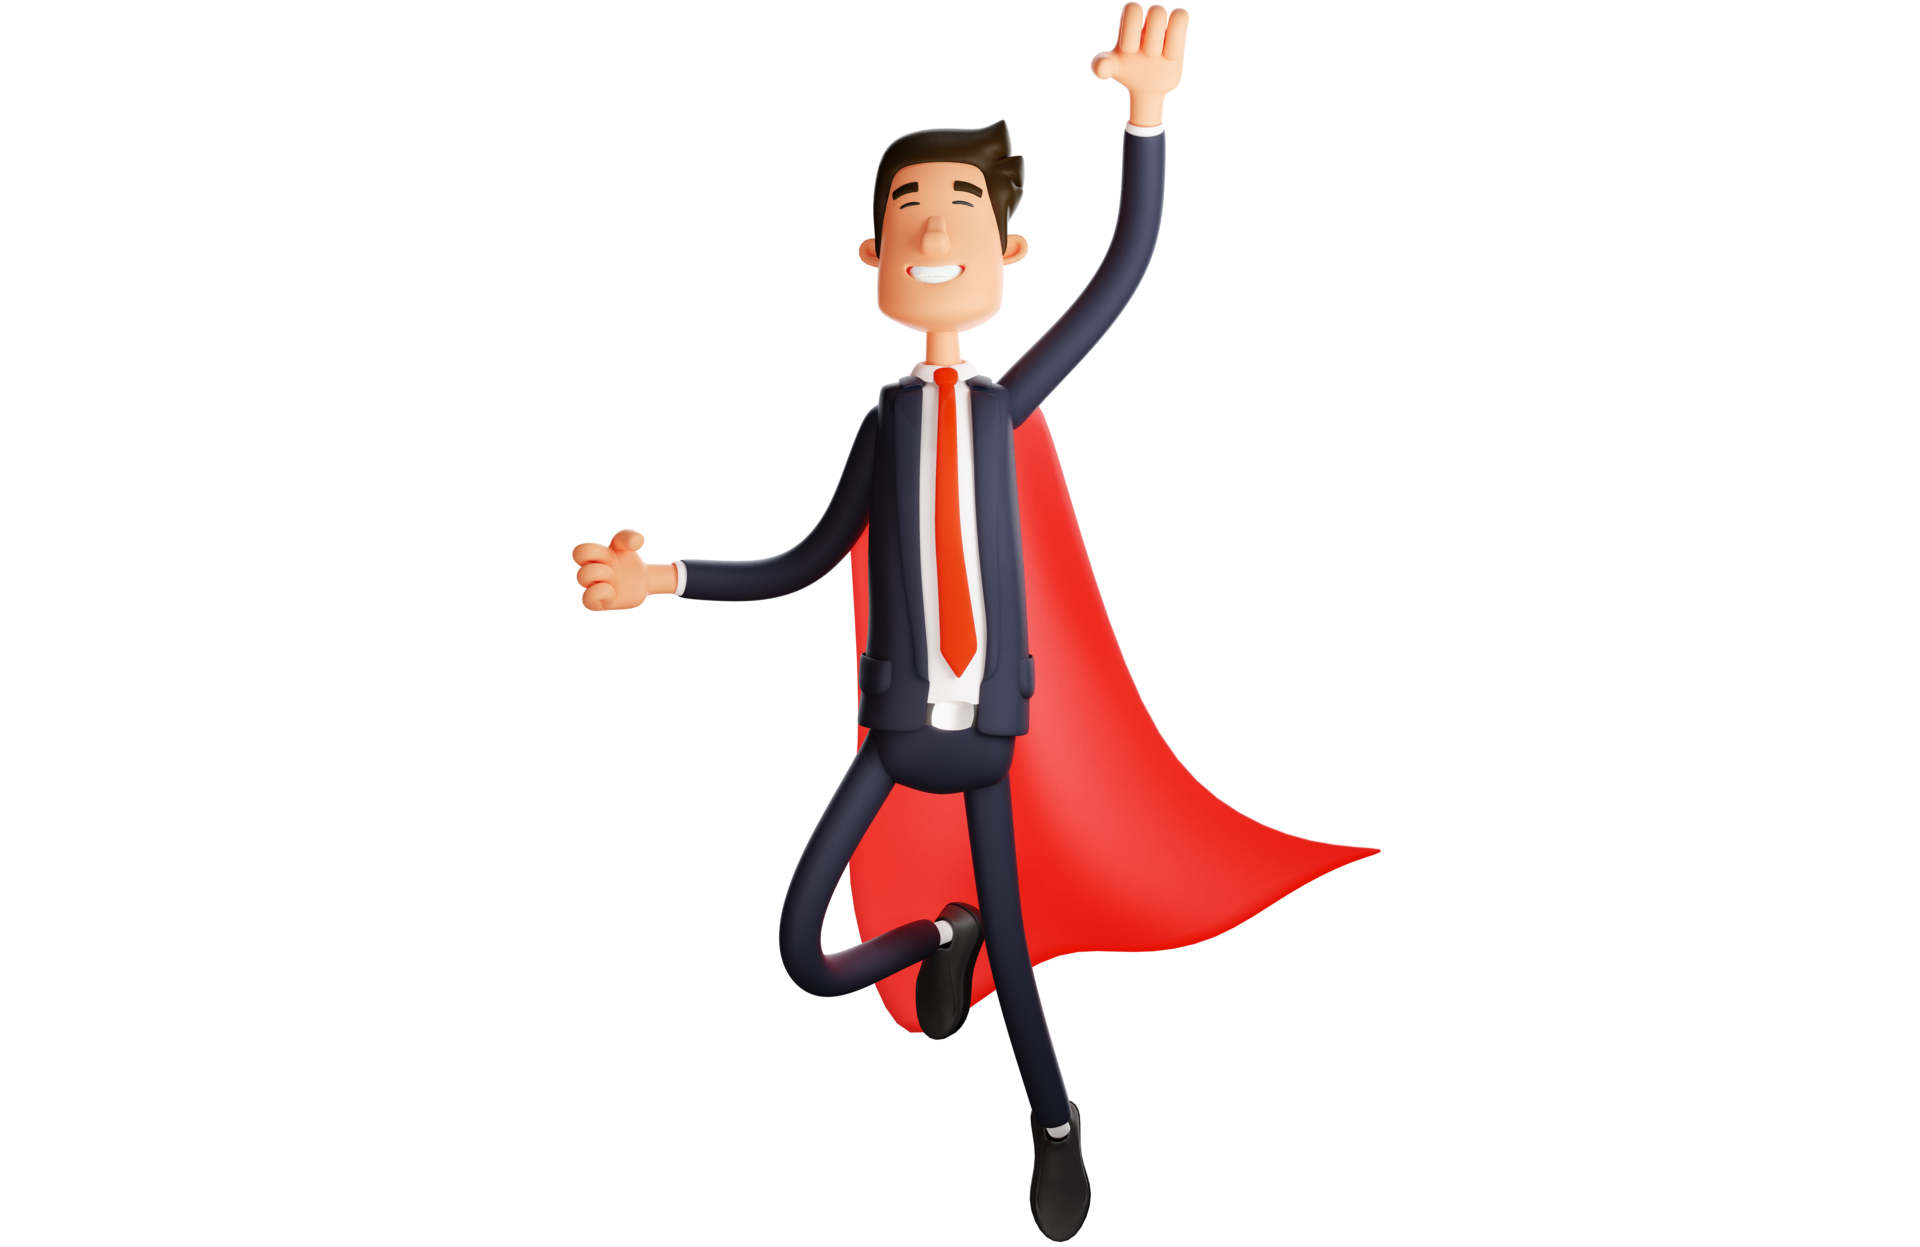 Free 3D illustration. Cute 3D office worker Cartoon Character. The office  worker wears a red cape on his back. Office worker smiles cutely and poses  for flying. 3D Cartoon Character 17172824 PNG